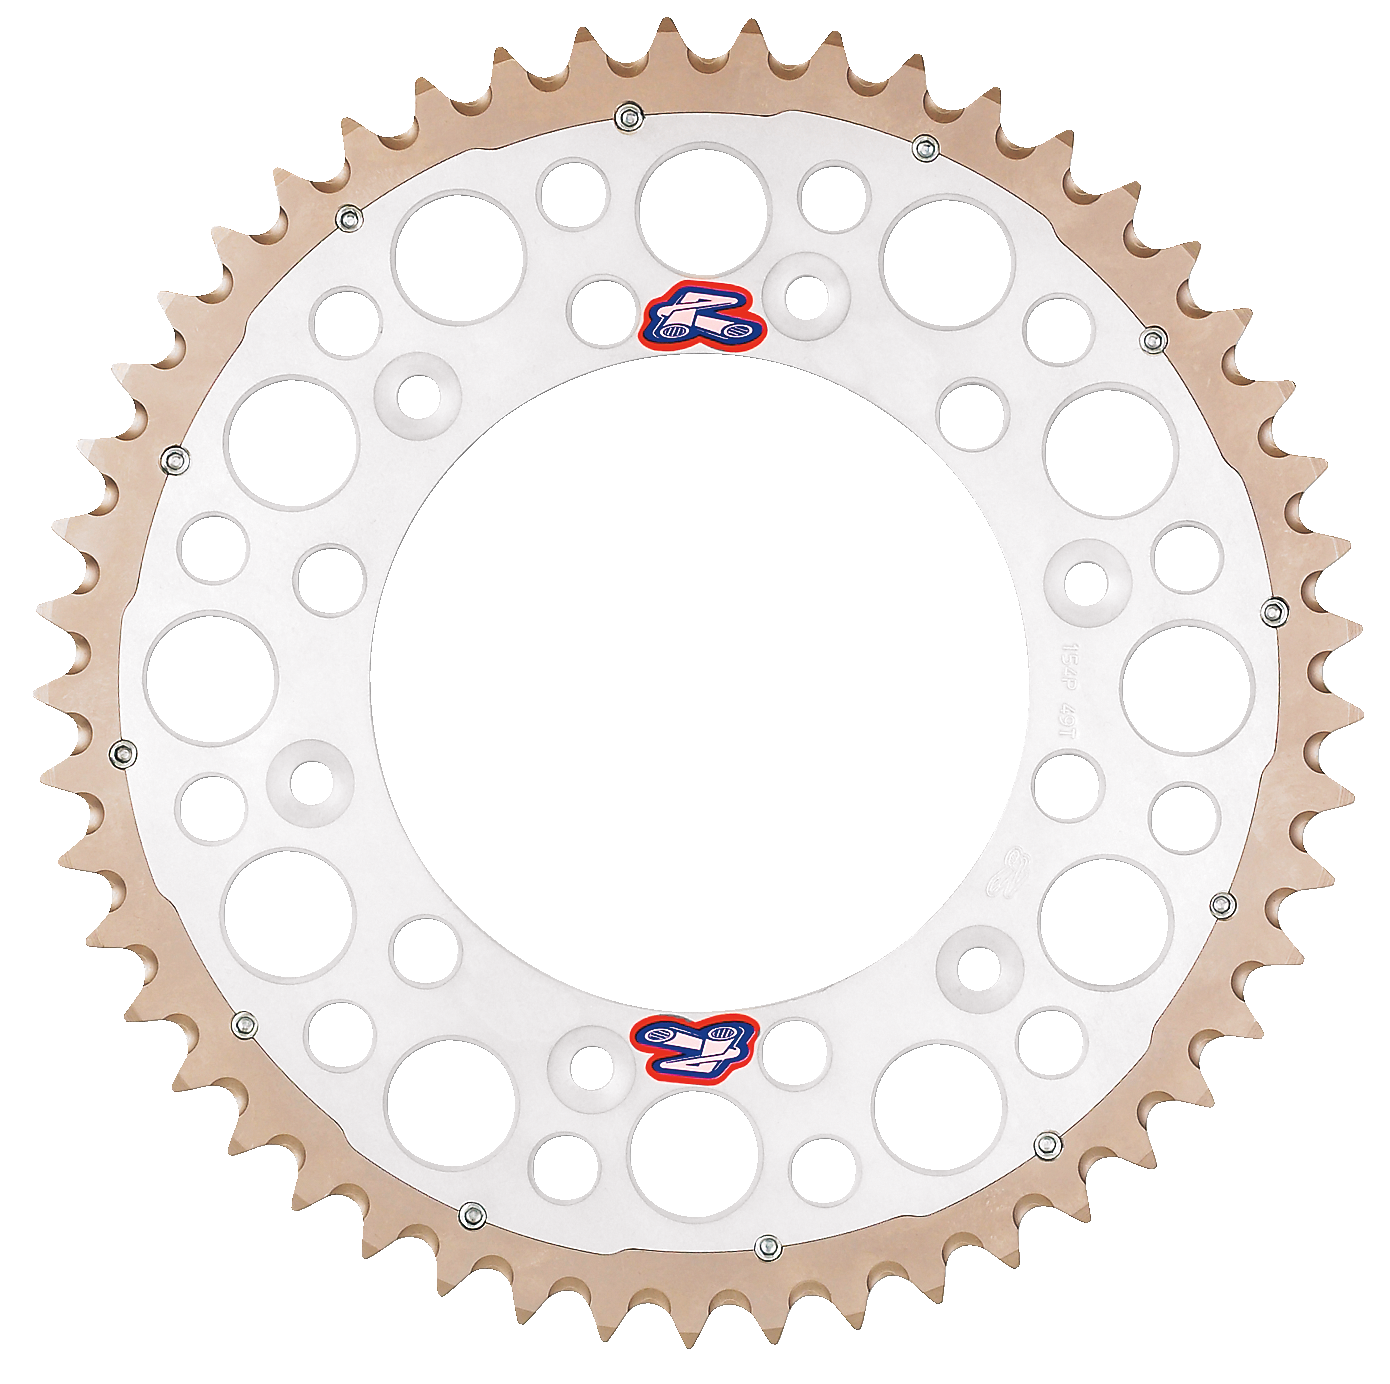 RENTHAL Twinring™ Rear Sprocket - 48 Tooth - Silver 1540-520-48GPSI